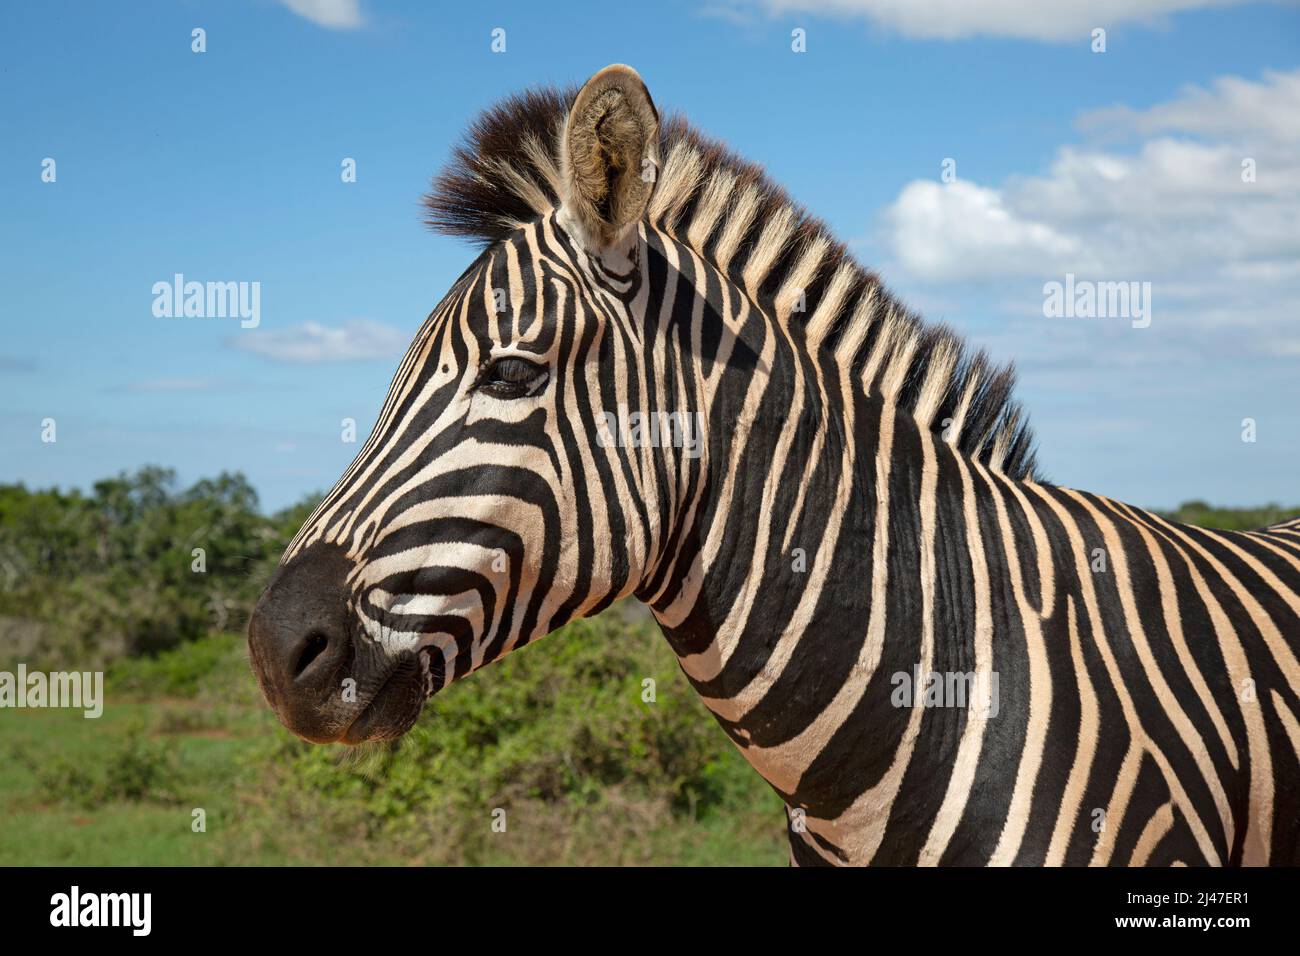 A Burchell's Zebra at the Addo Elephant Park, South Africa. Stock Photo